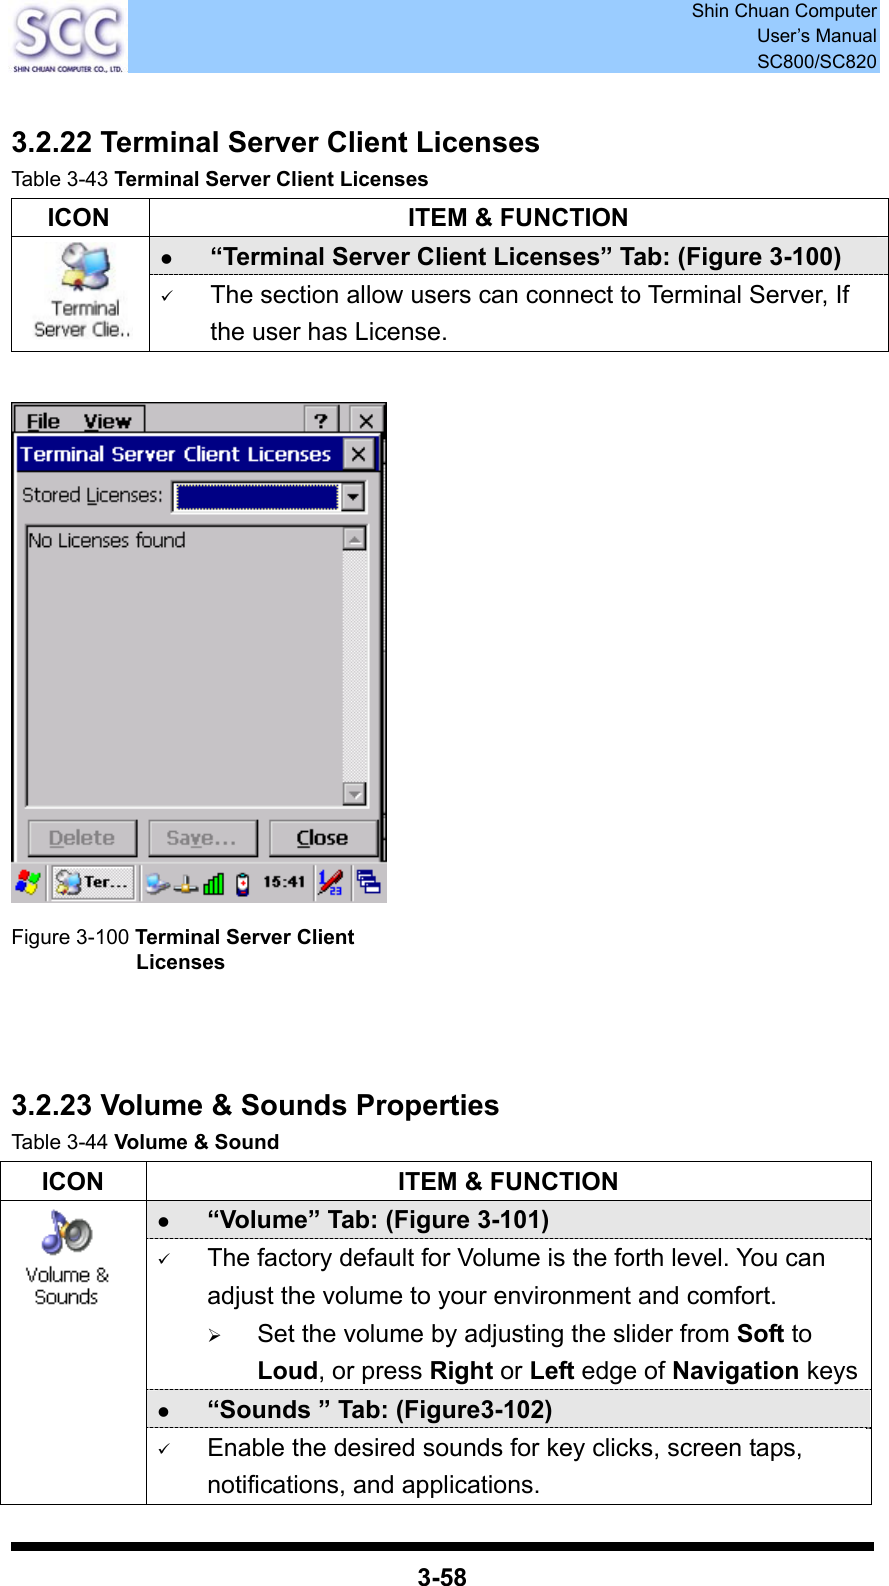  Shin Chuan Computer User’s Manual SC800/SC820  3-58  3.2.22 Terminal Server Client Licenses Table 3-43 Terminal Server Client Licenses   ICON  ITEM &amp; FUNCTION z “Terminal Server Client Licenses” Tab: (Figure 3-100)  9 The section allow users can connect to Terminal Server, If the user has License.   Figure 3-100 Terminal Server Client Licenses    3.2.23 Volume &amp; Sounds Properties Table 3-44 Volume &amp; Sound ICON  ITEM &amp; FUNCTION z “Volume” Tab: (Figure 3-101) 9 The factory default for Volume is the forth level. You can adjust the volume to your environment and comfort.   ¾ Set the volume by adjusting the slider from Soft to Loud, or press Right or Left edge of Navigation keysz “Sounds ” Tab: (Figure3-102)  9 Enable the desired sounds for key clicks, screen taps, notifications, and applications. 